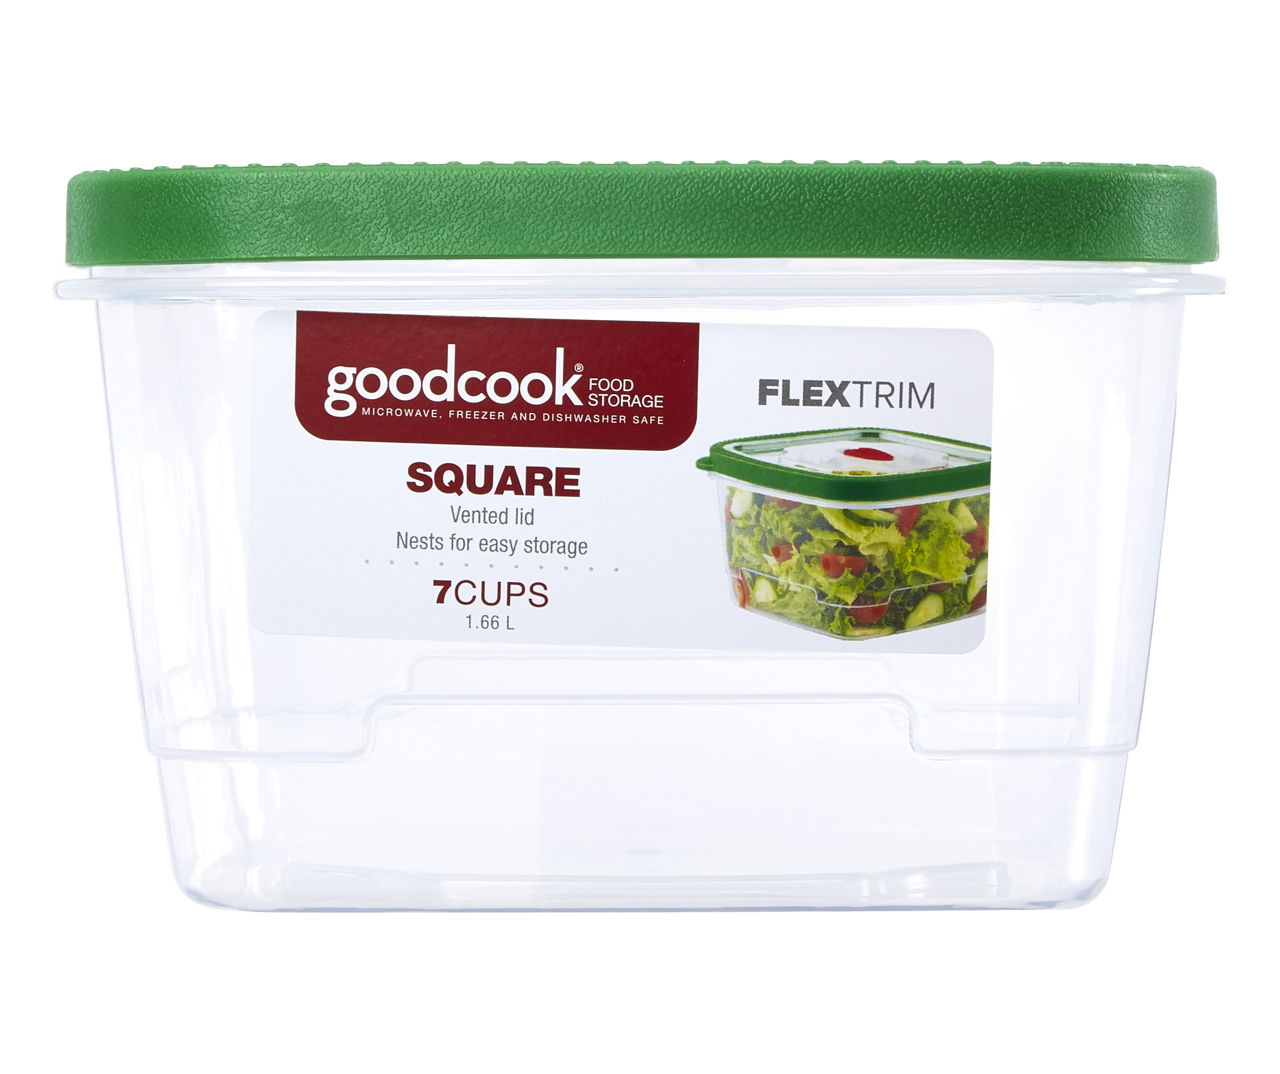 Good Cook Dishwasher Safe Food Storage Containers